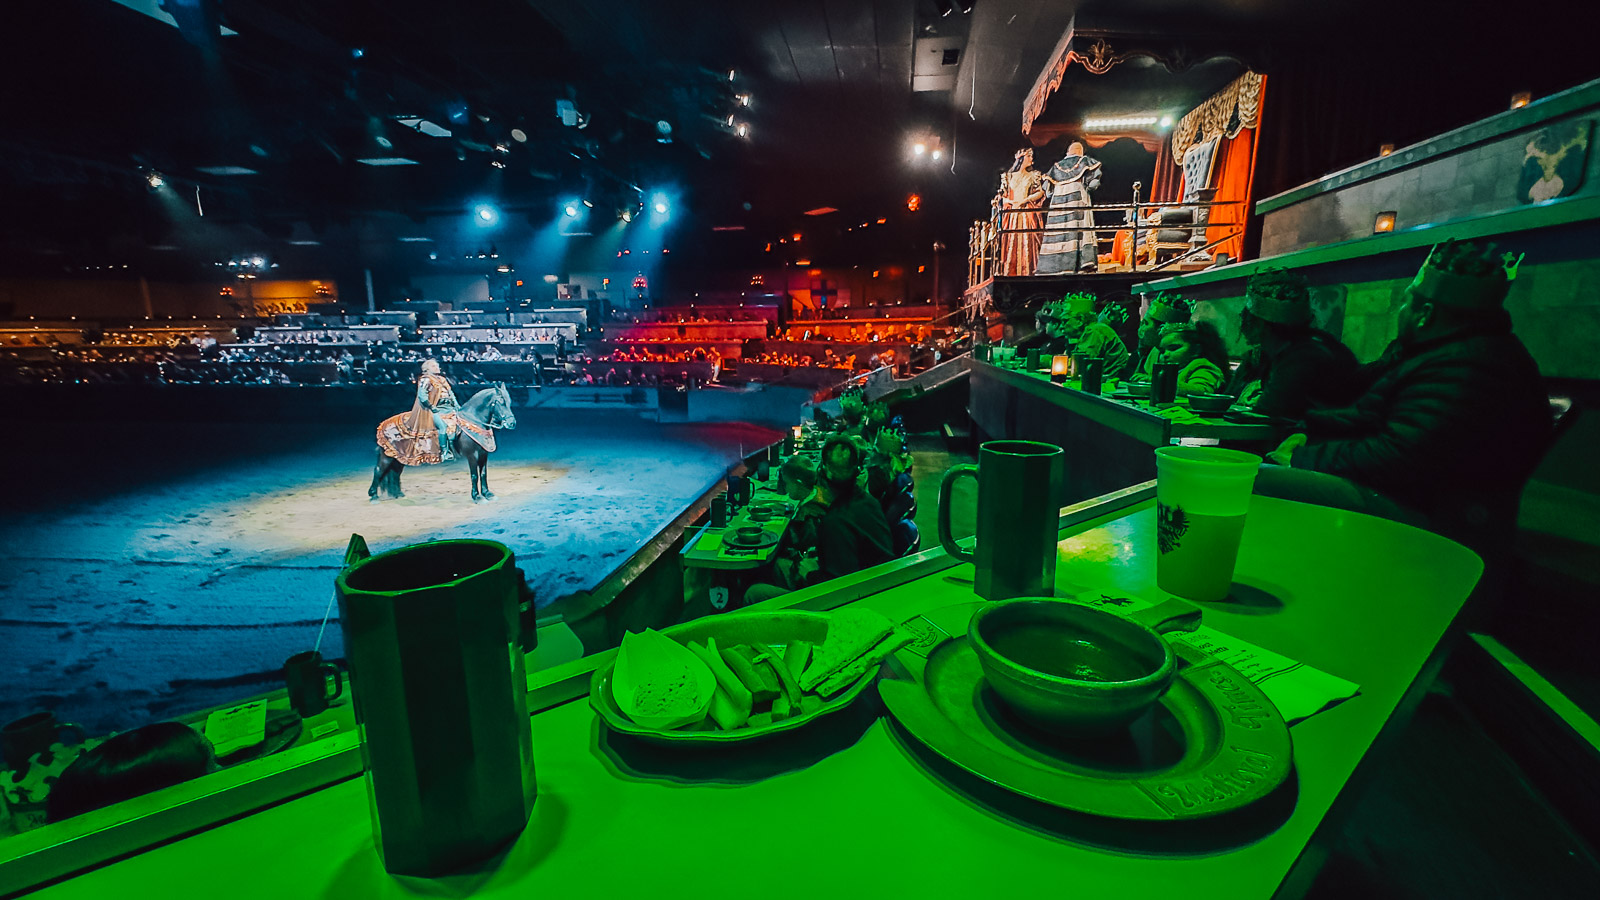 medieval times dinner theater show a popular buena park attraction in california